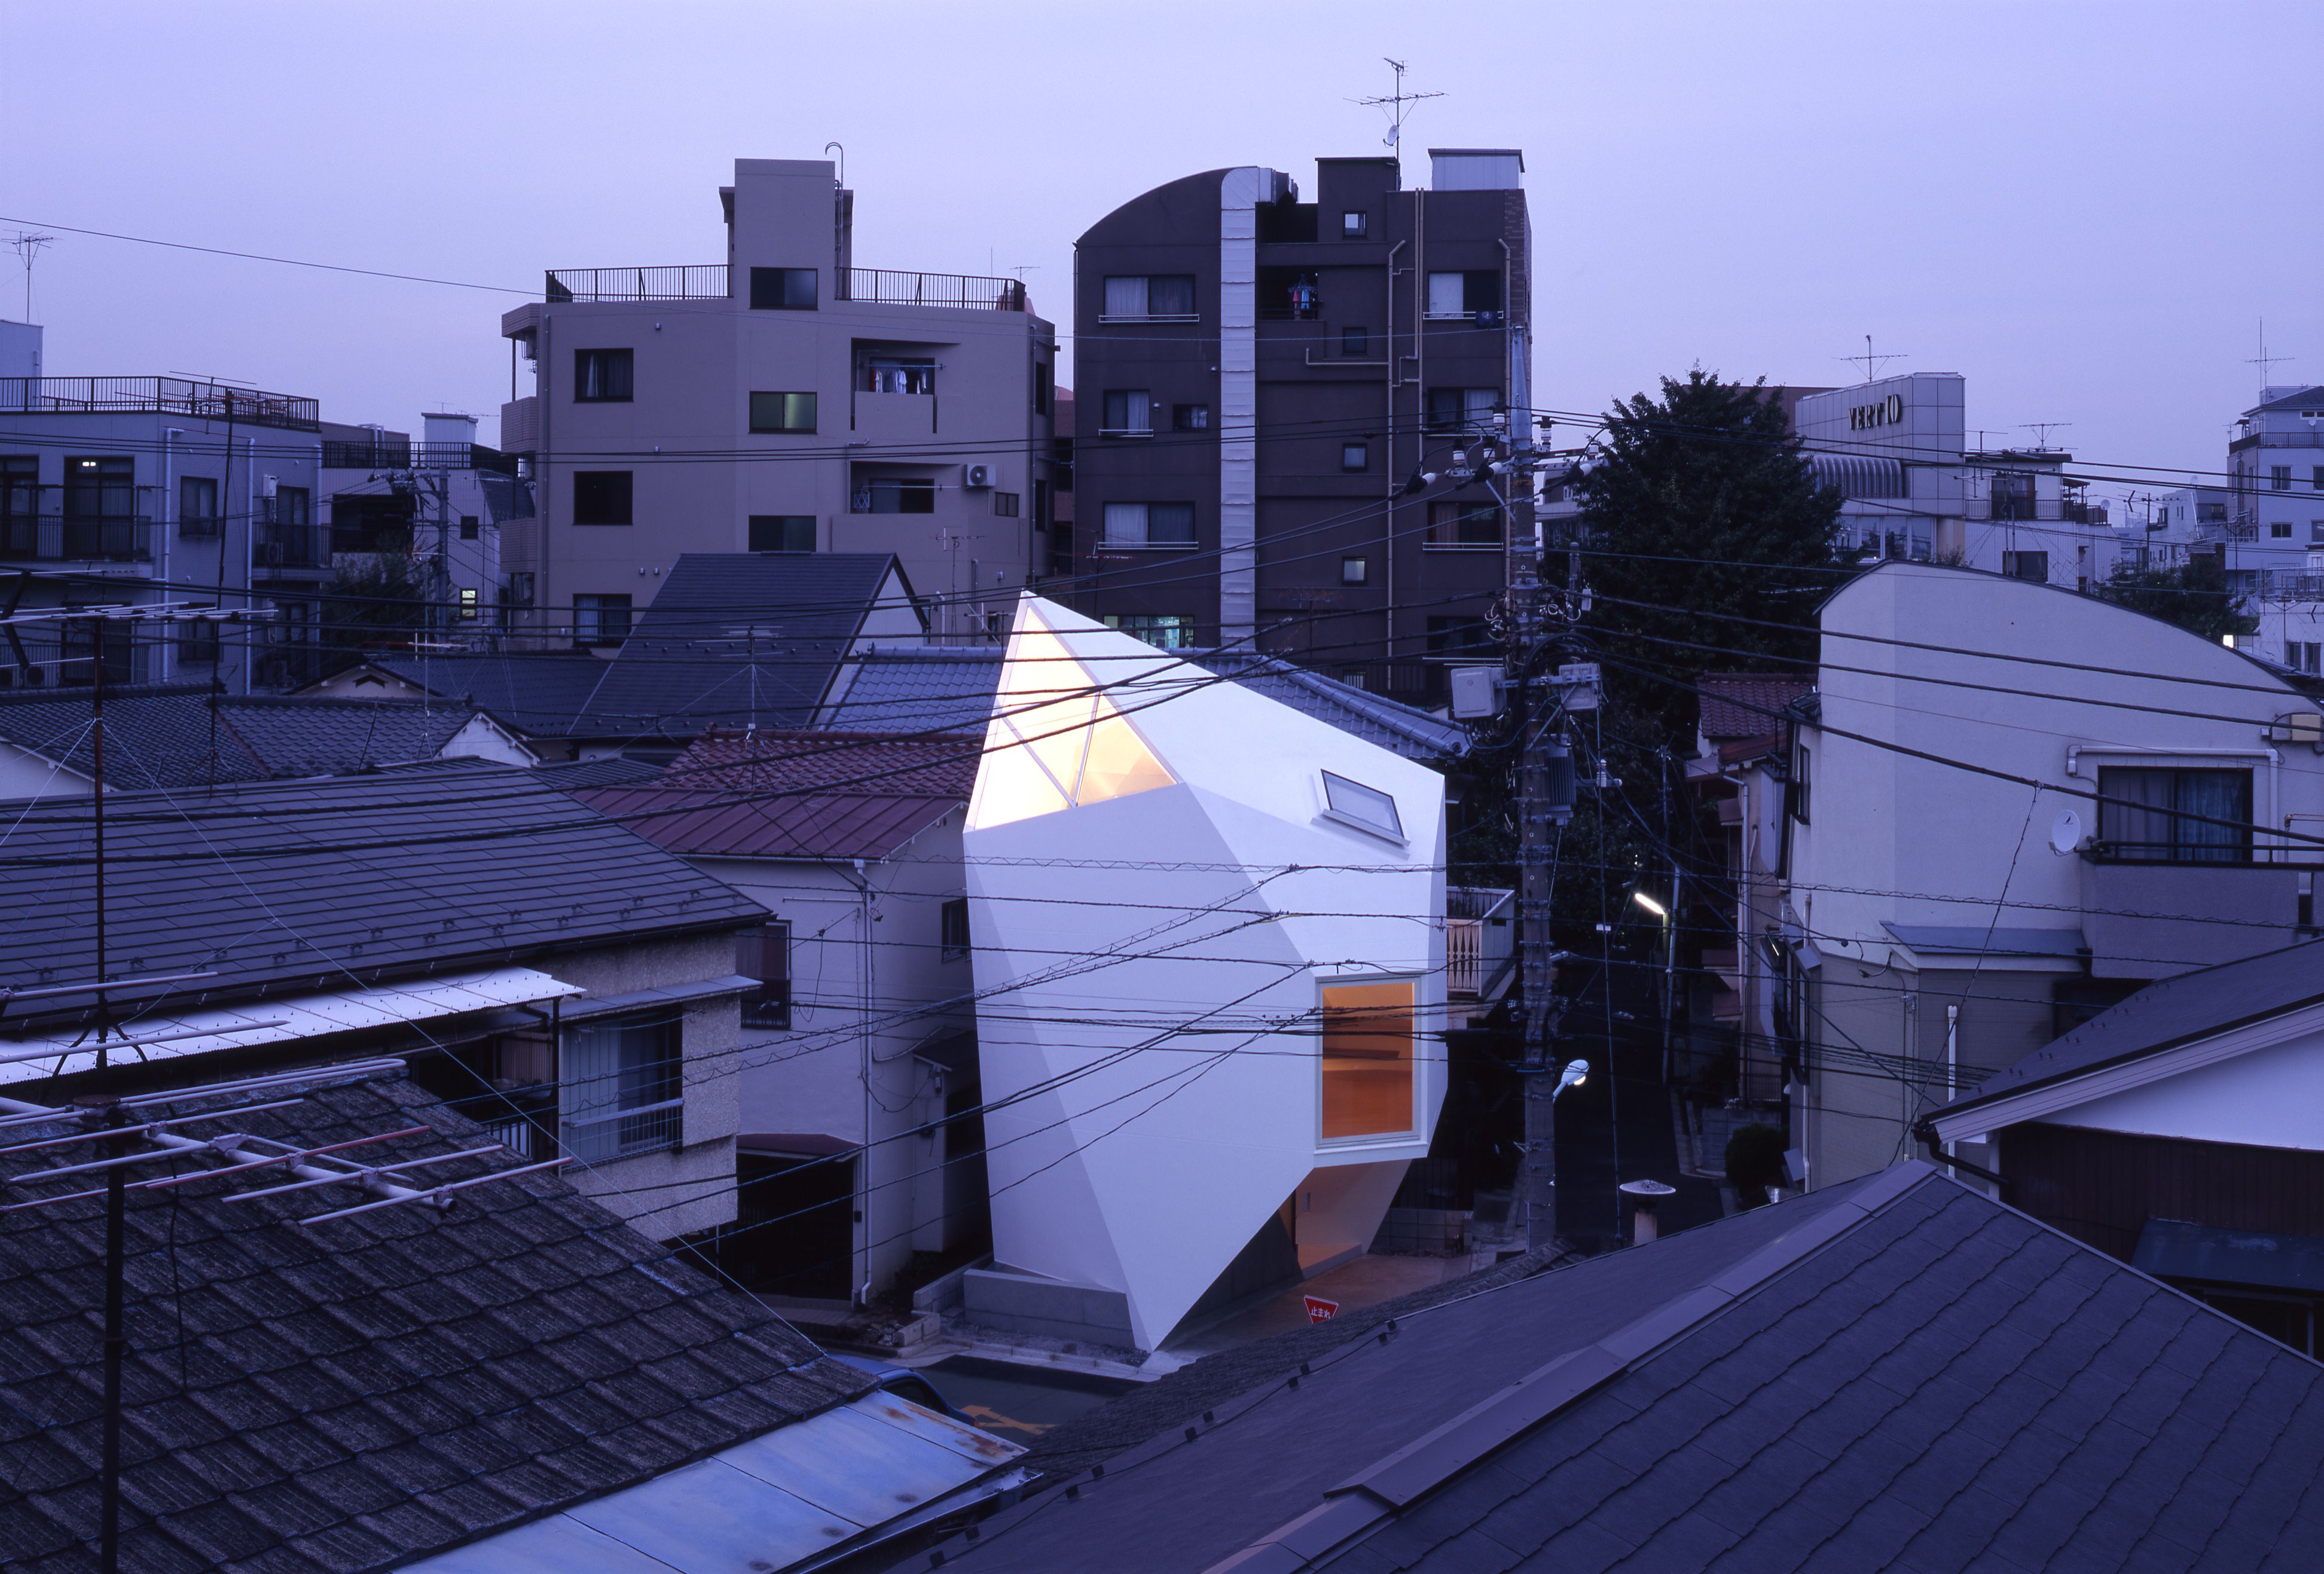 Light-Filled Tiny Apartment Is Inspired by Japanese and